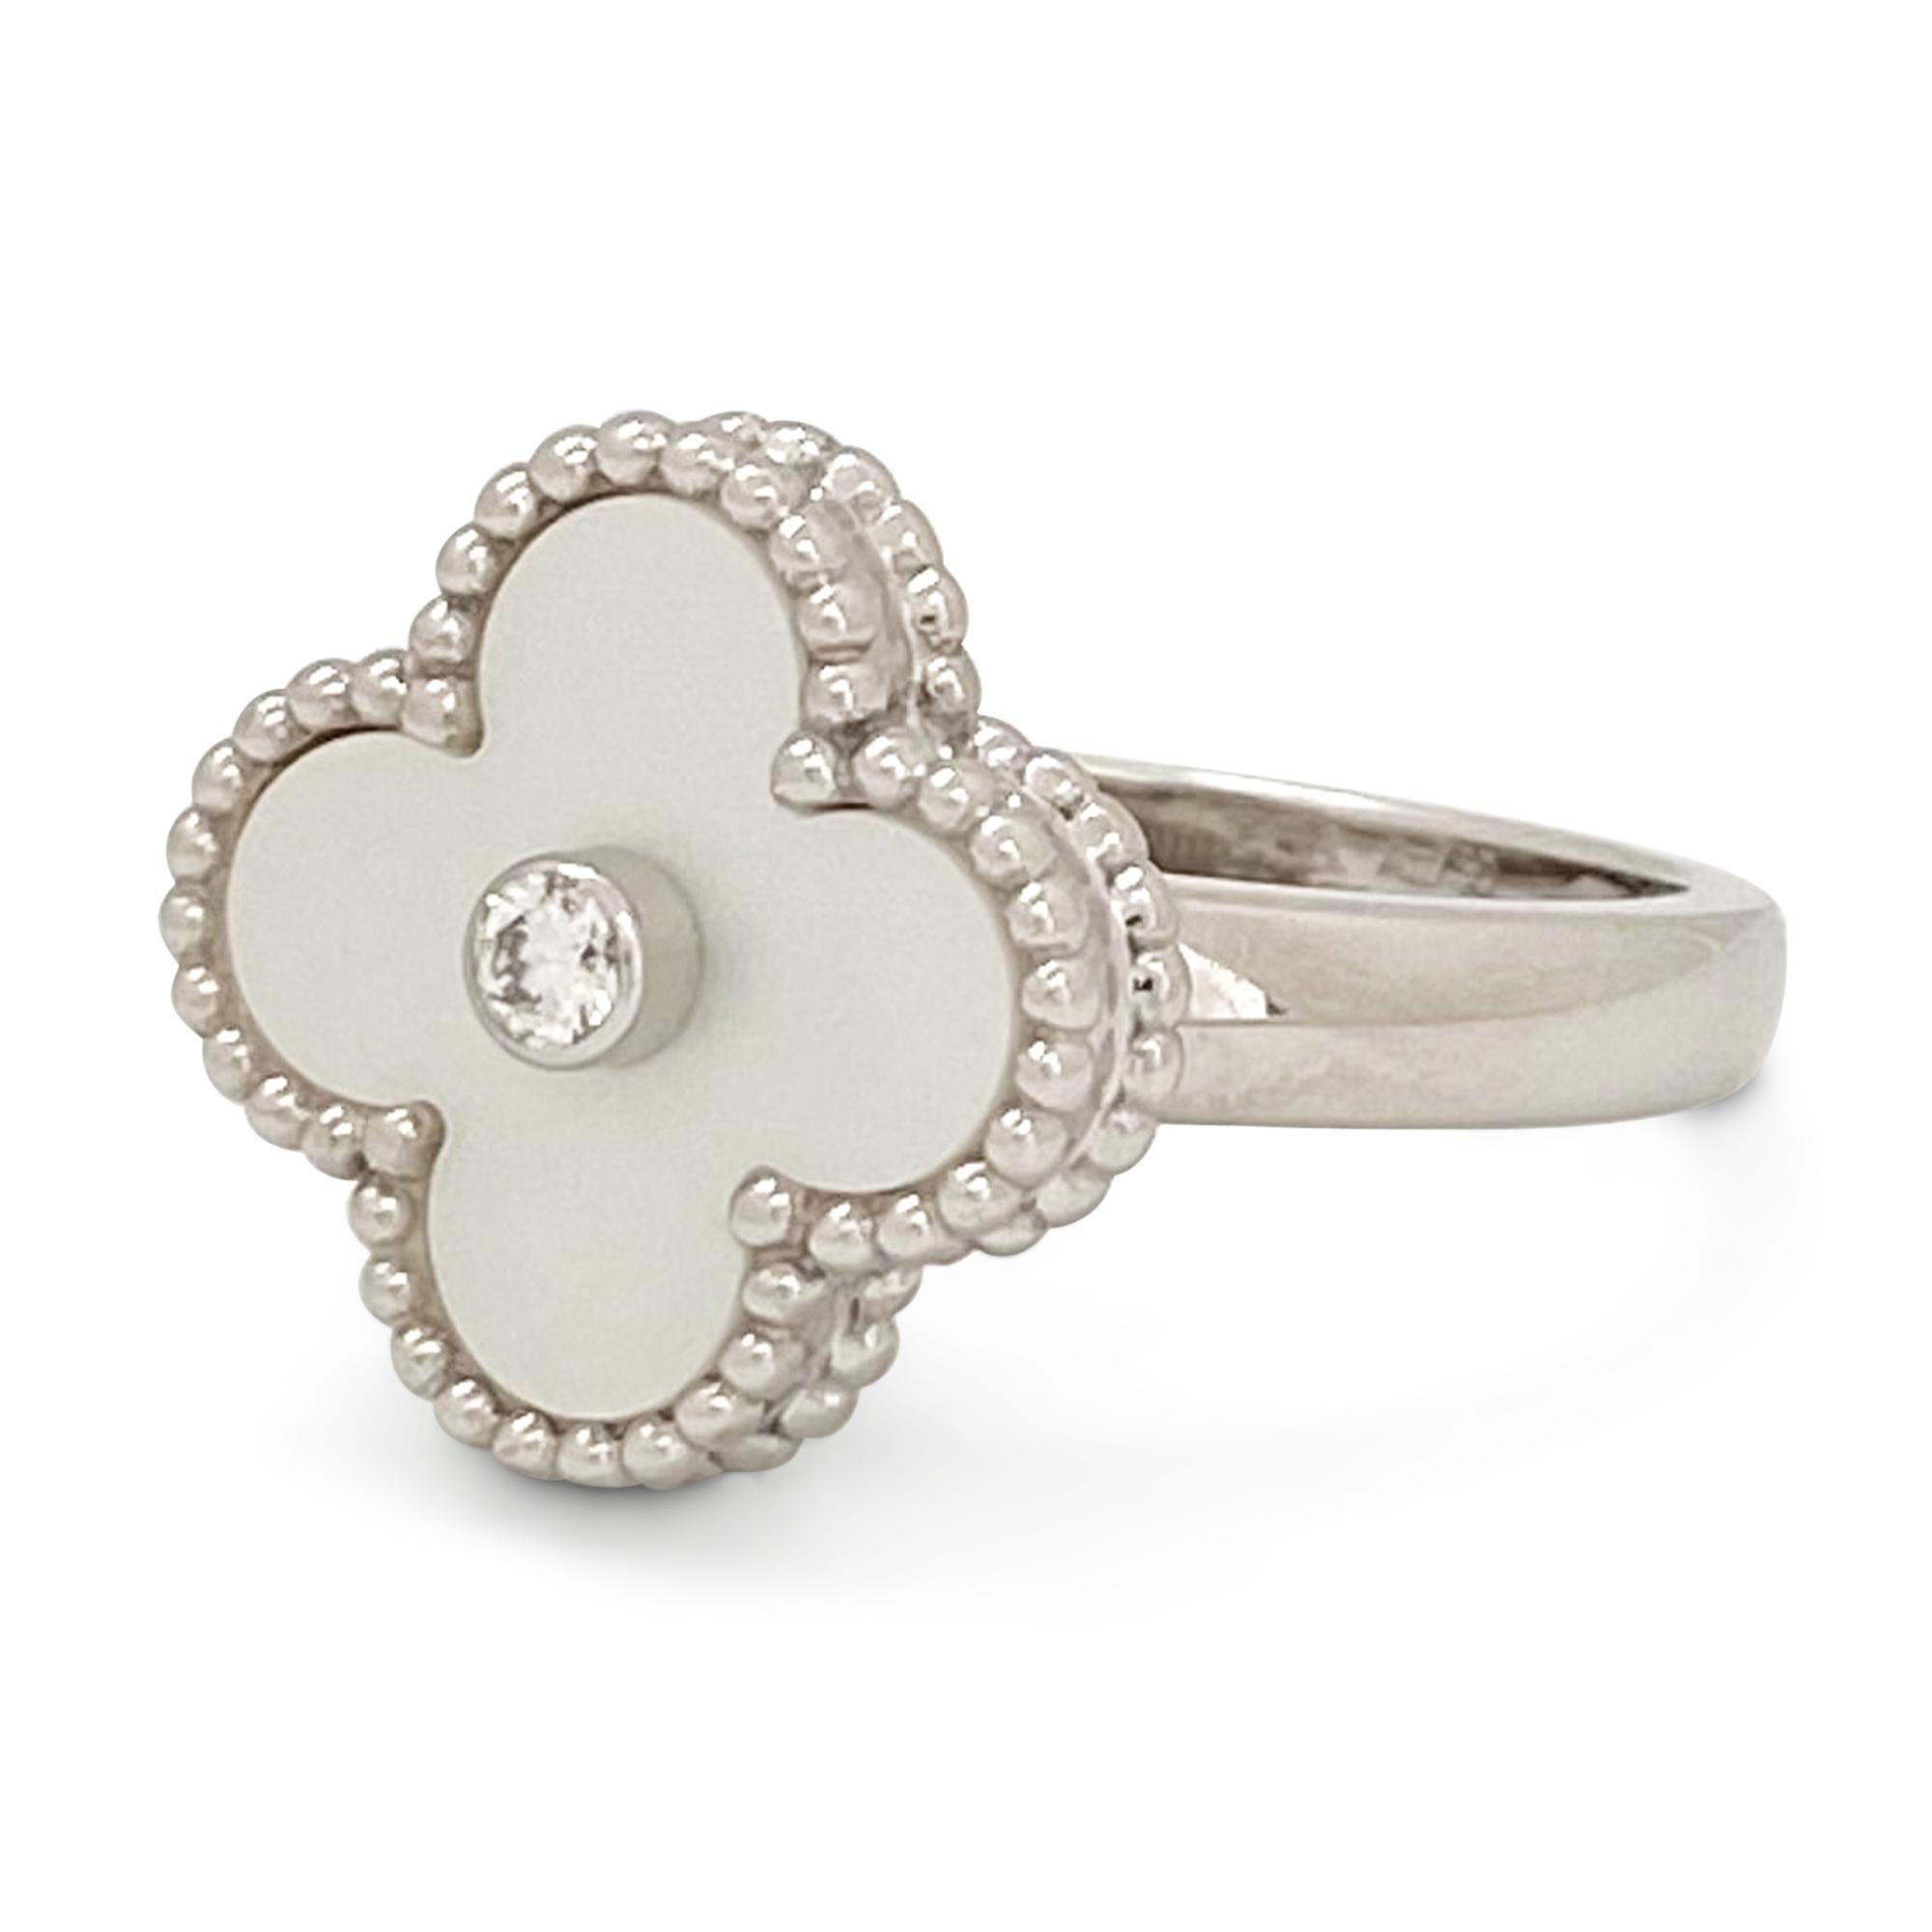 Authentic Van Cleef & Arpels 'Vintage Alhambra' ring crafted in 18 karat white gold centers on a clover motif in mother-of-pearl set with a round brilliant cut diamond center weighing an estimated 0.06 carats (E-F color, VS clarity). Signed VCA,